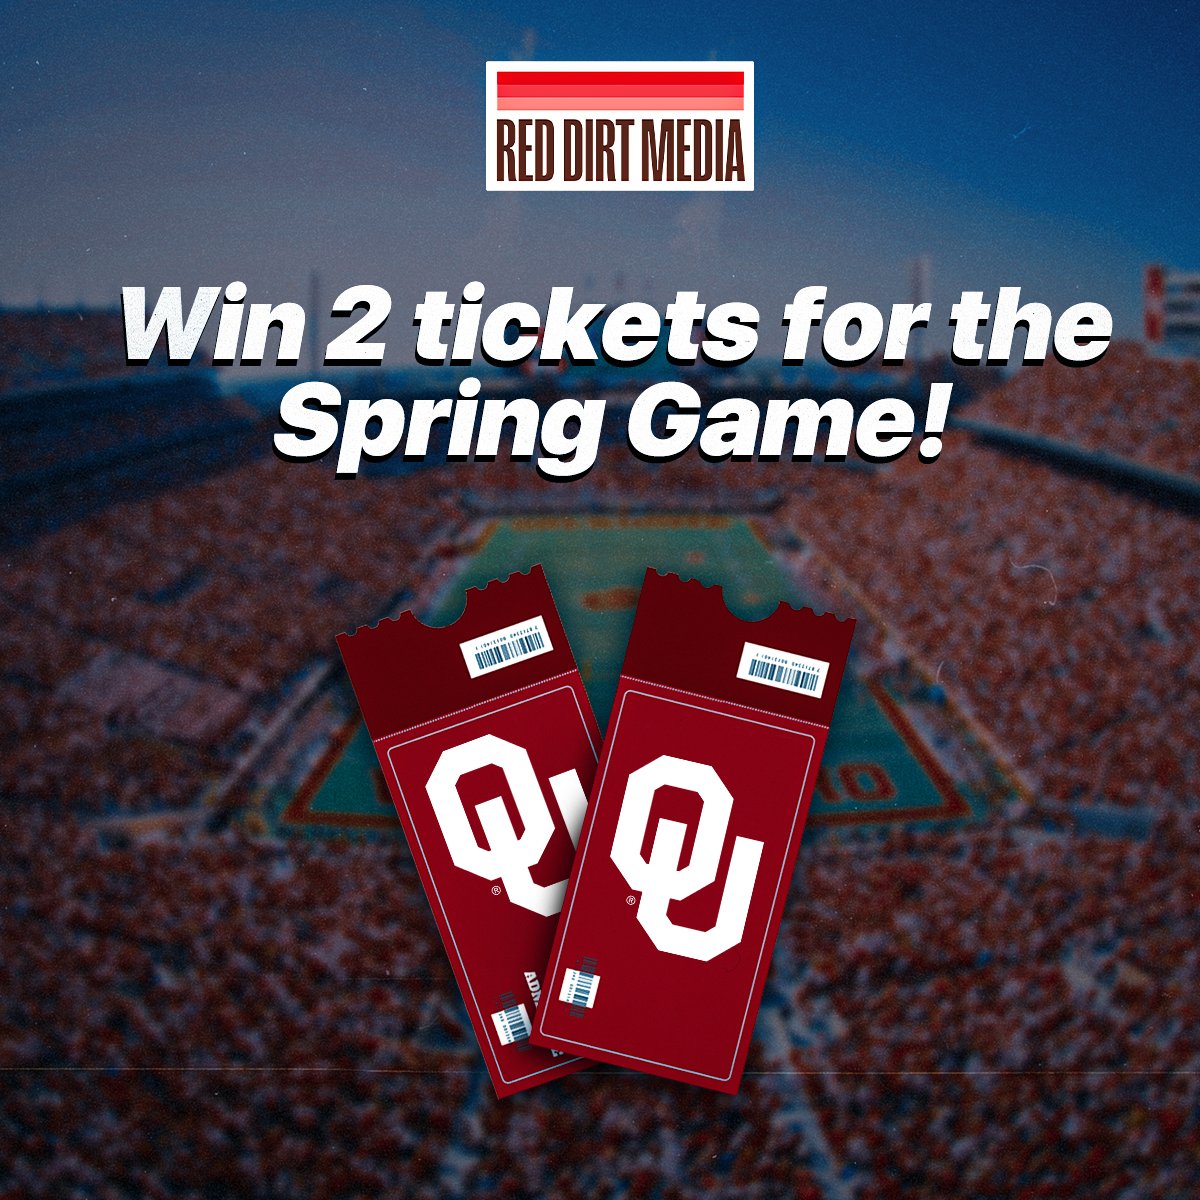 We are giving away 20 FREE tickets for Oklahoma's Spring Game! To enter, all you have to do is: • Like & RT • Tag a friend • Follow us @RedDirtMediaCo Each winner will receive two tickets. Winners will be announced on 4/12!